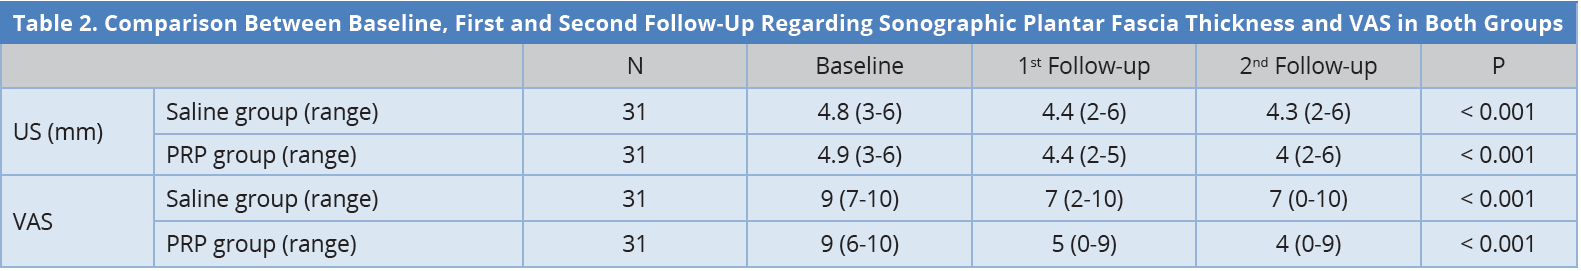 Table 2.PNGComparison between baseline, first and second follow-up regarding sonographic plantar fascia thickness and vas in both groups.<br><sup>All groups were significantly different from each other by pair wise comparison. The data were presented in median. PRP, platelet-rich plasma; US, ultrasonography; VAS, visual analogue scale.</sup>